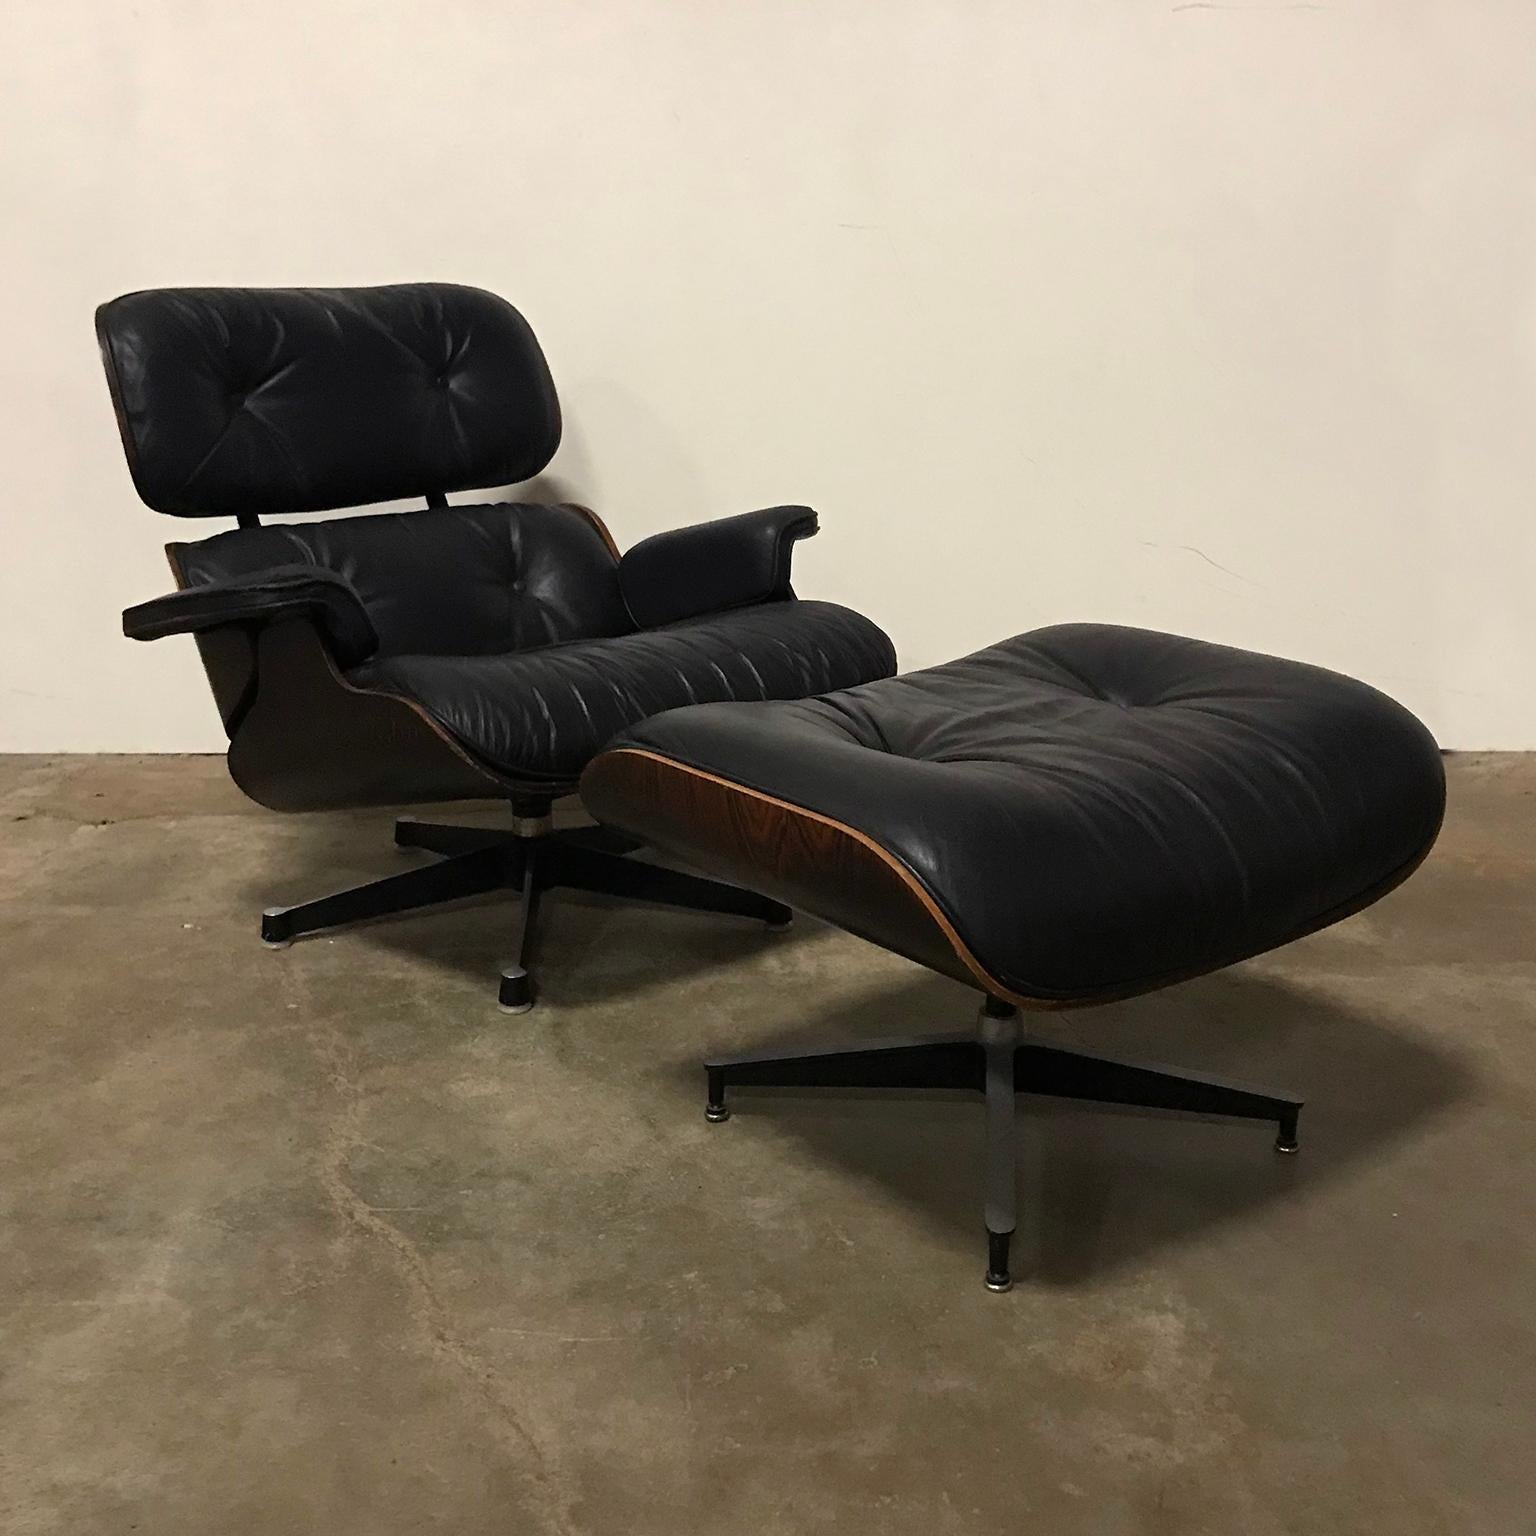 1956, Ray & Charles Eames Lounge Chair, Rare First Edition 1956 in Black Leather For Sale 9